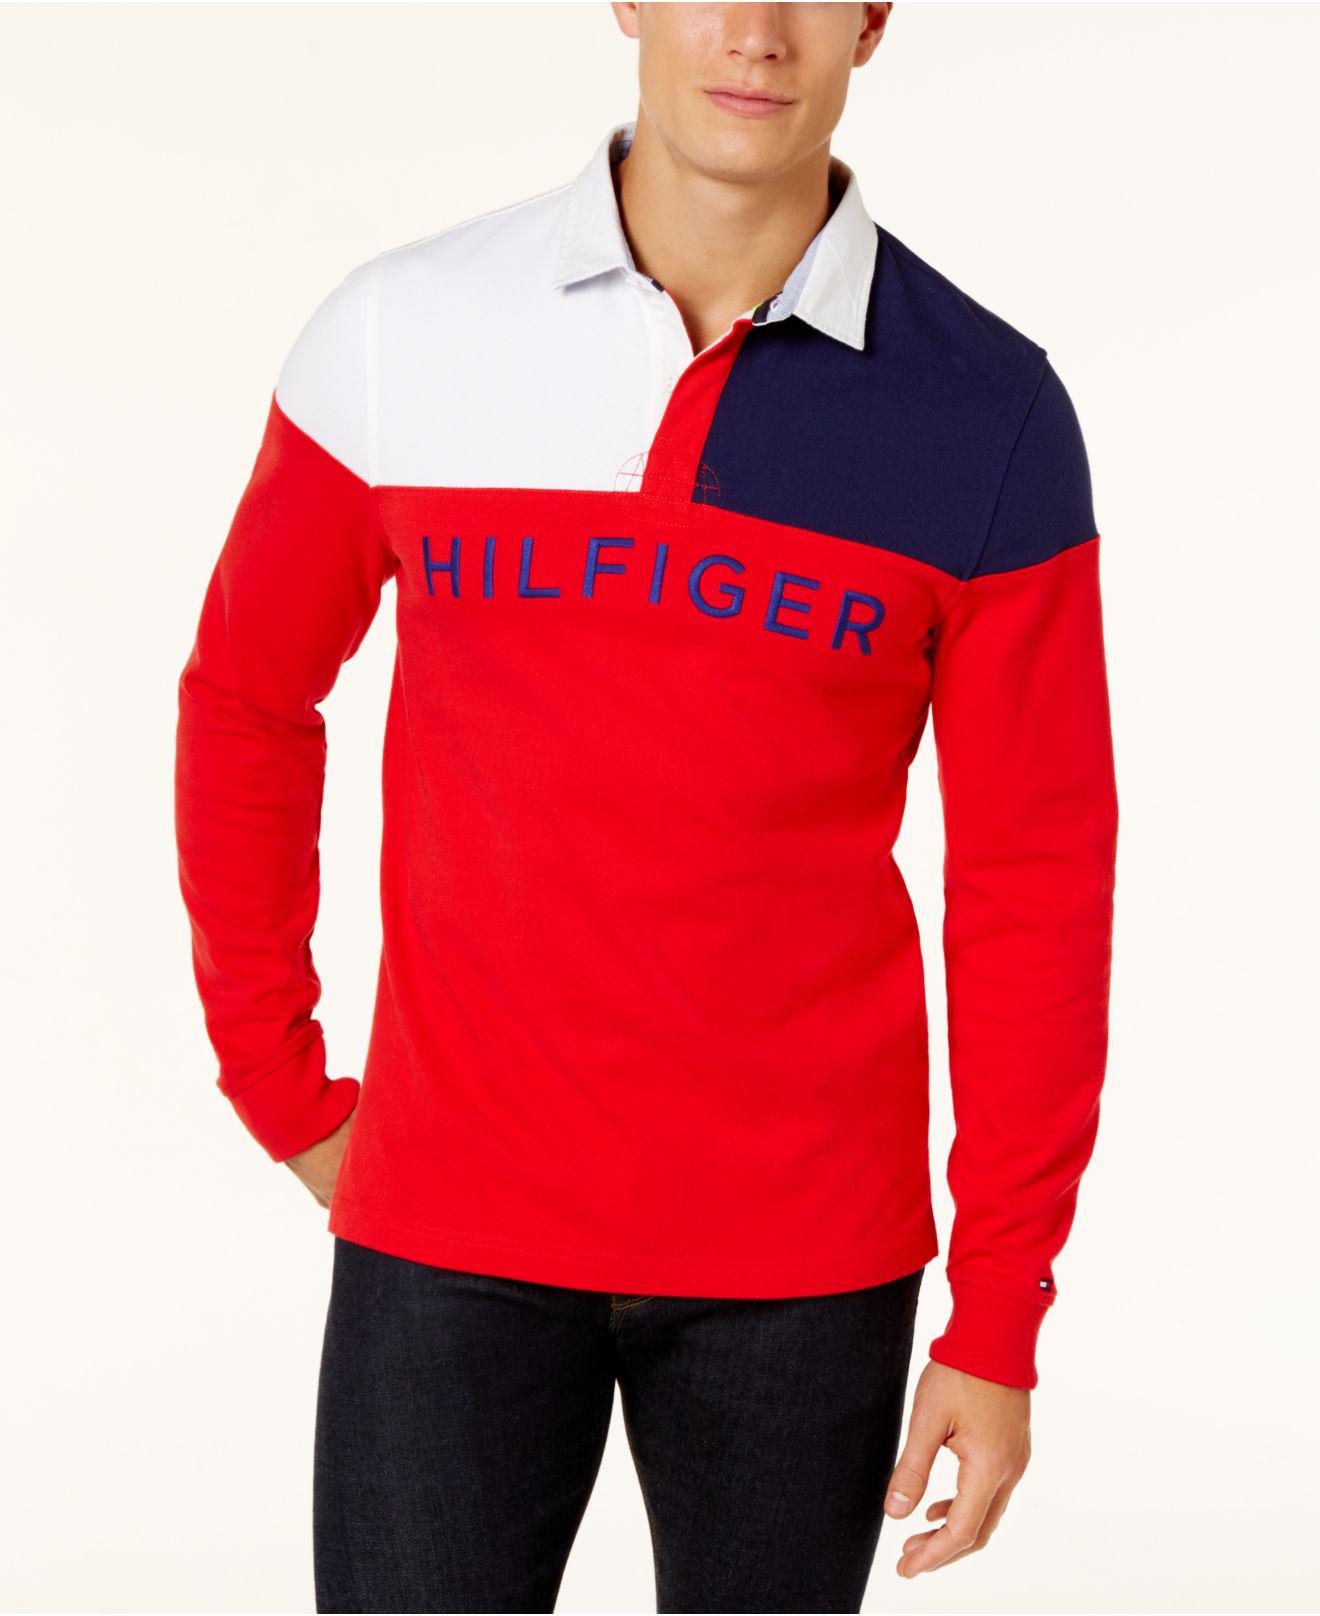 Tommy Hilfiger Rugby Top Discount, 57% OFF | www.ipecal.edu.mx